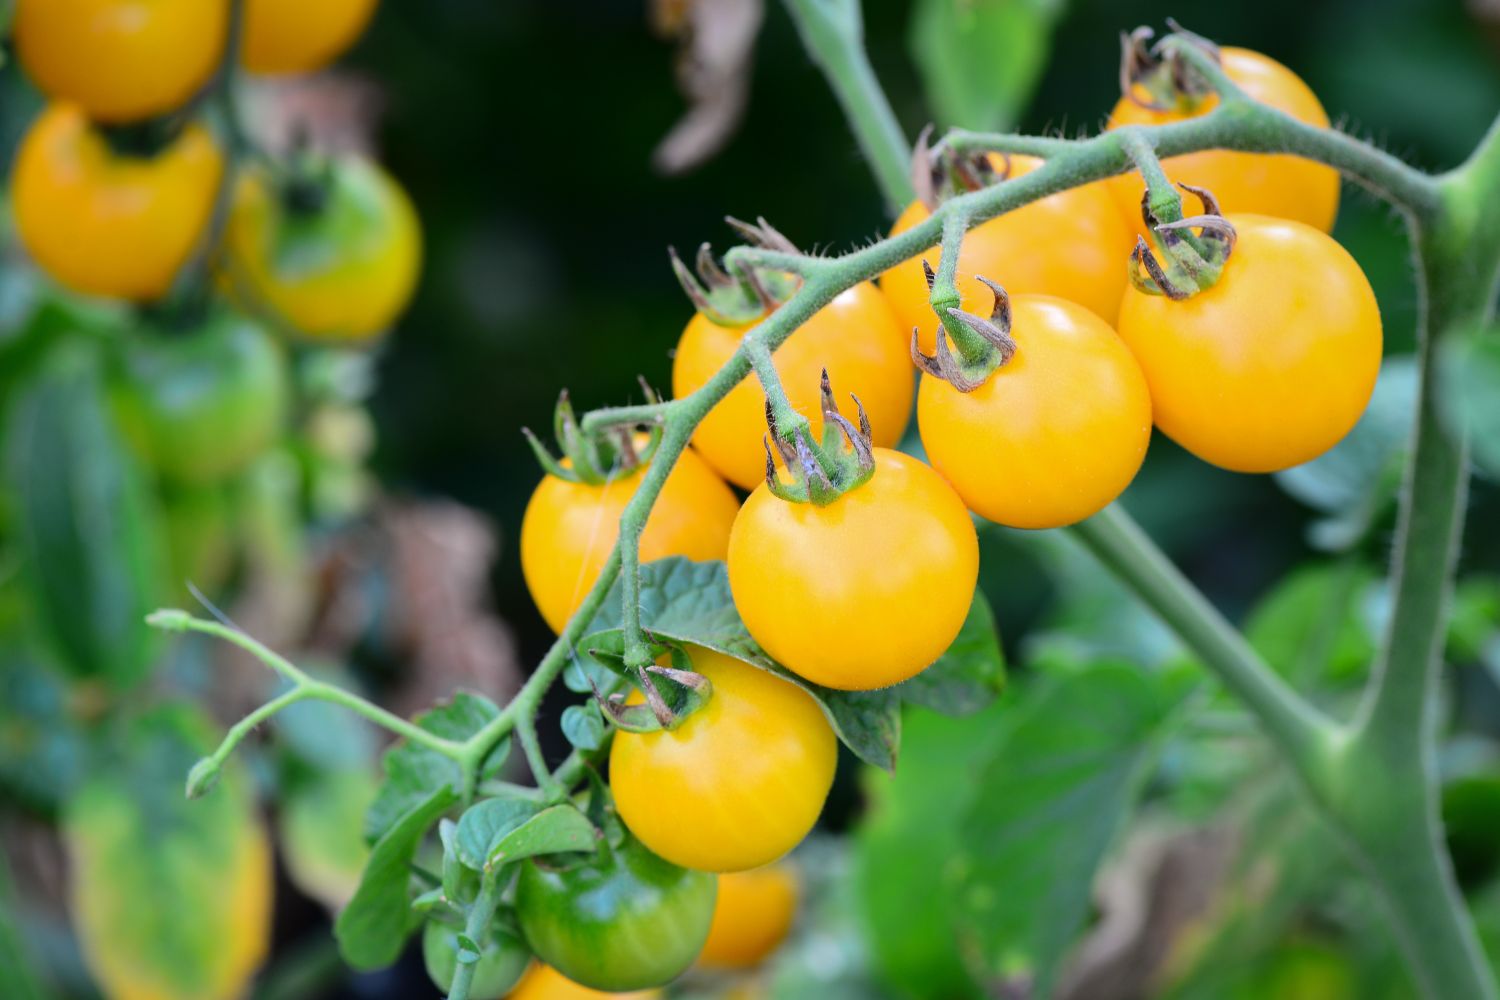 Tomato plant aroma to protect crops